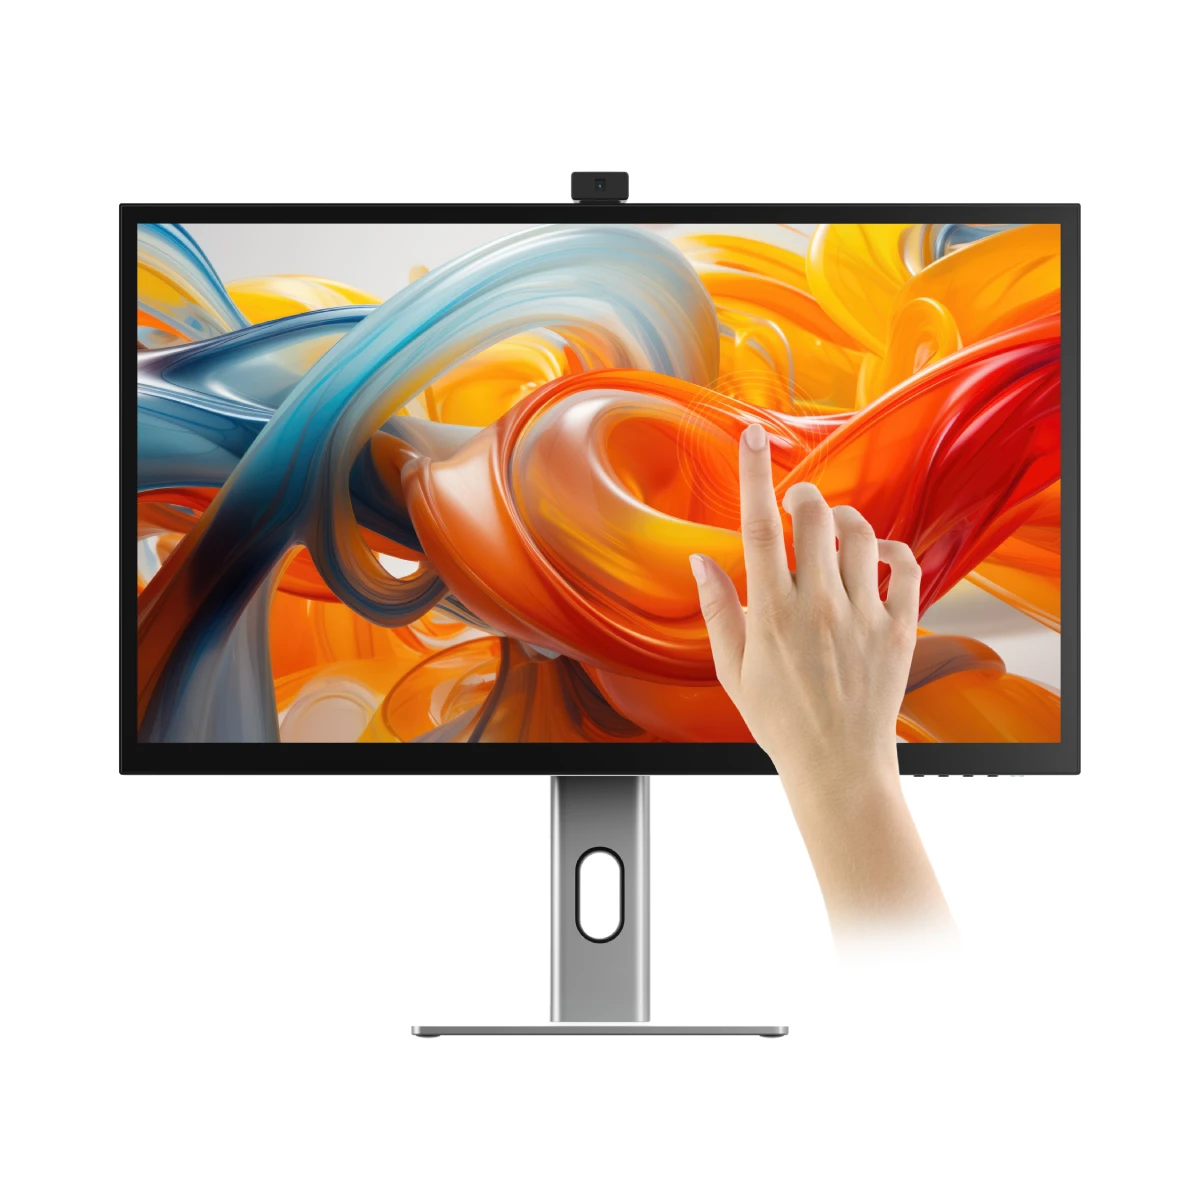 clarity-pro-touch-27-uhd-4k-monitor-with-65w-pd-webcam-and-touchscreen-dual-4k-universal-docking-station-hdmi-edition2